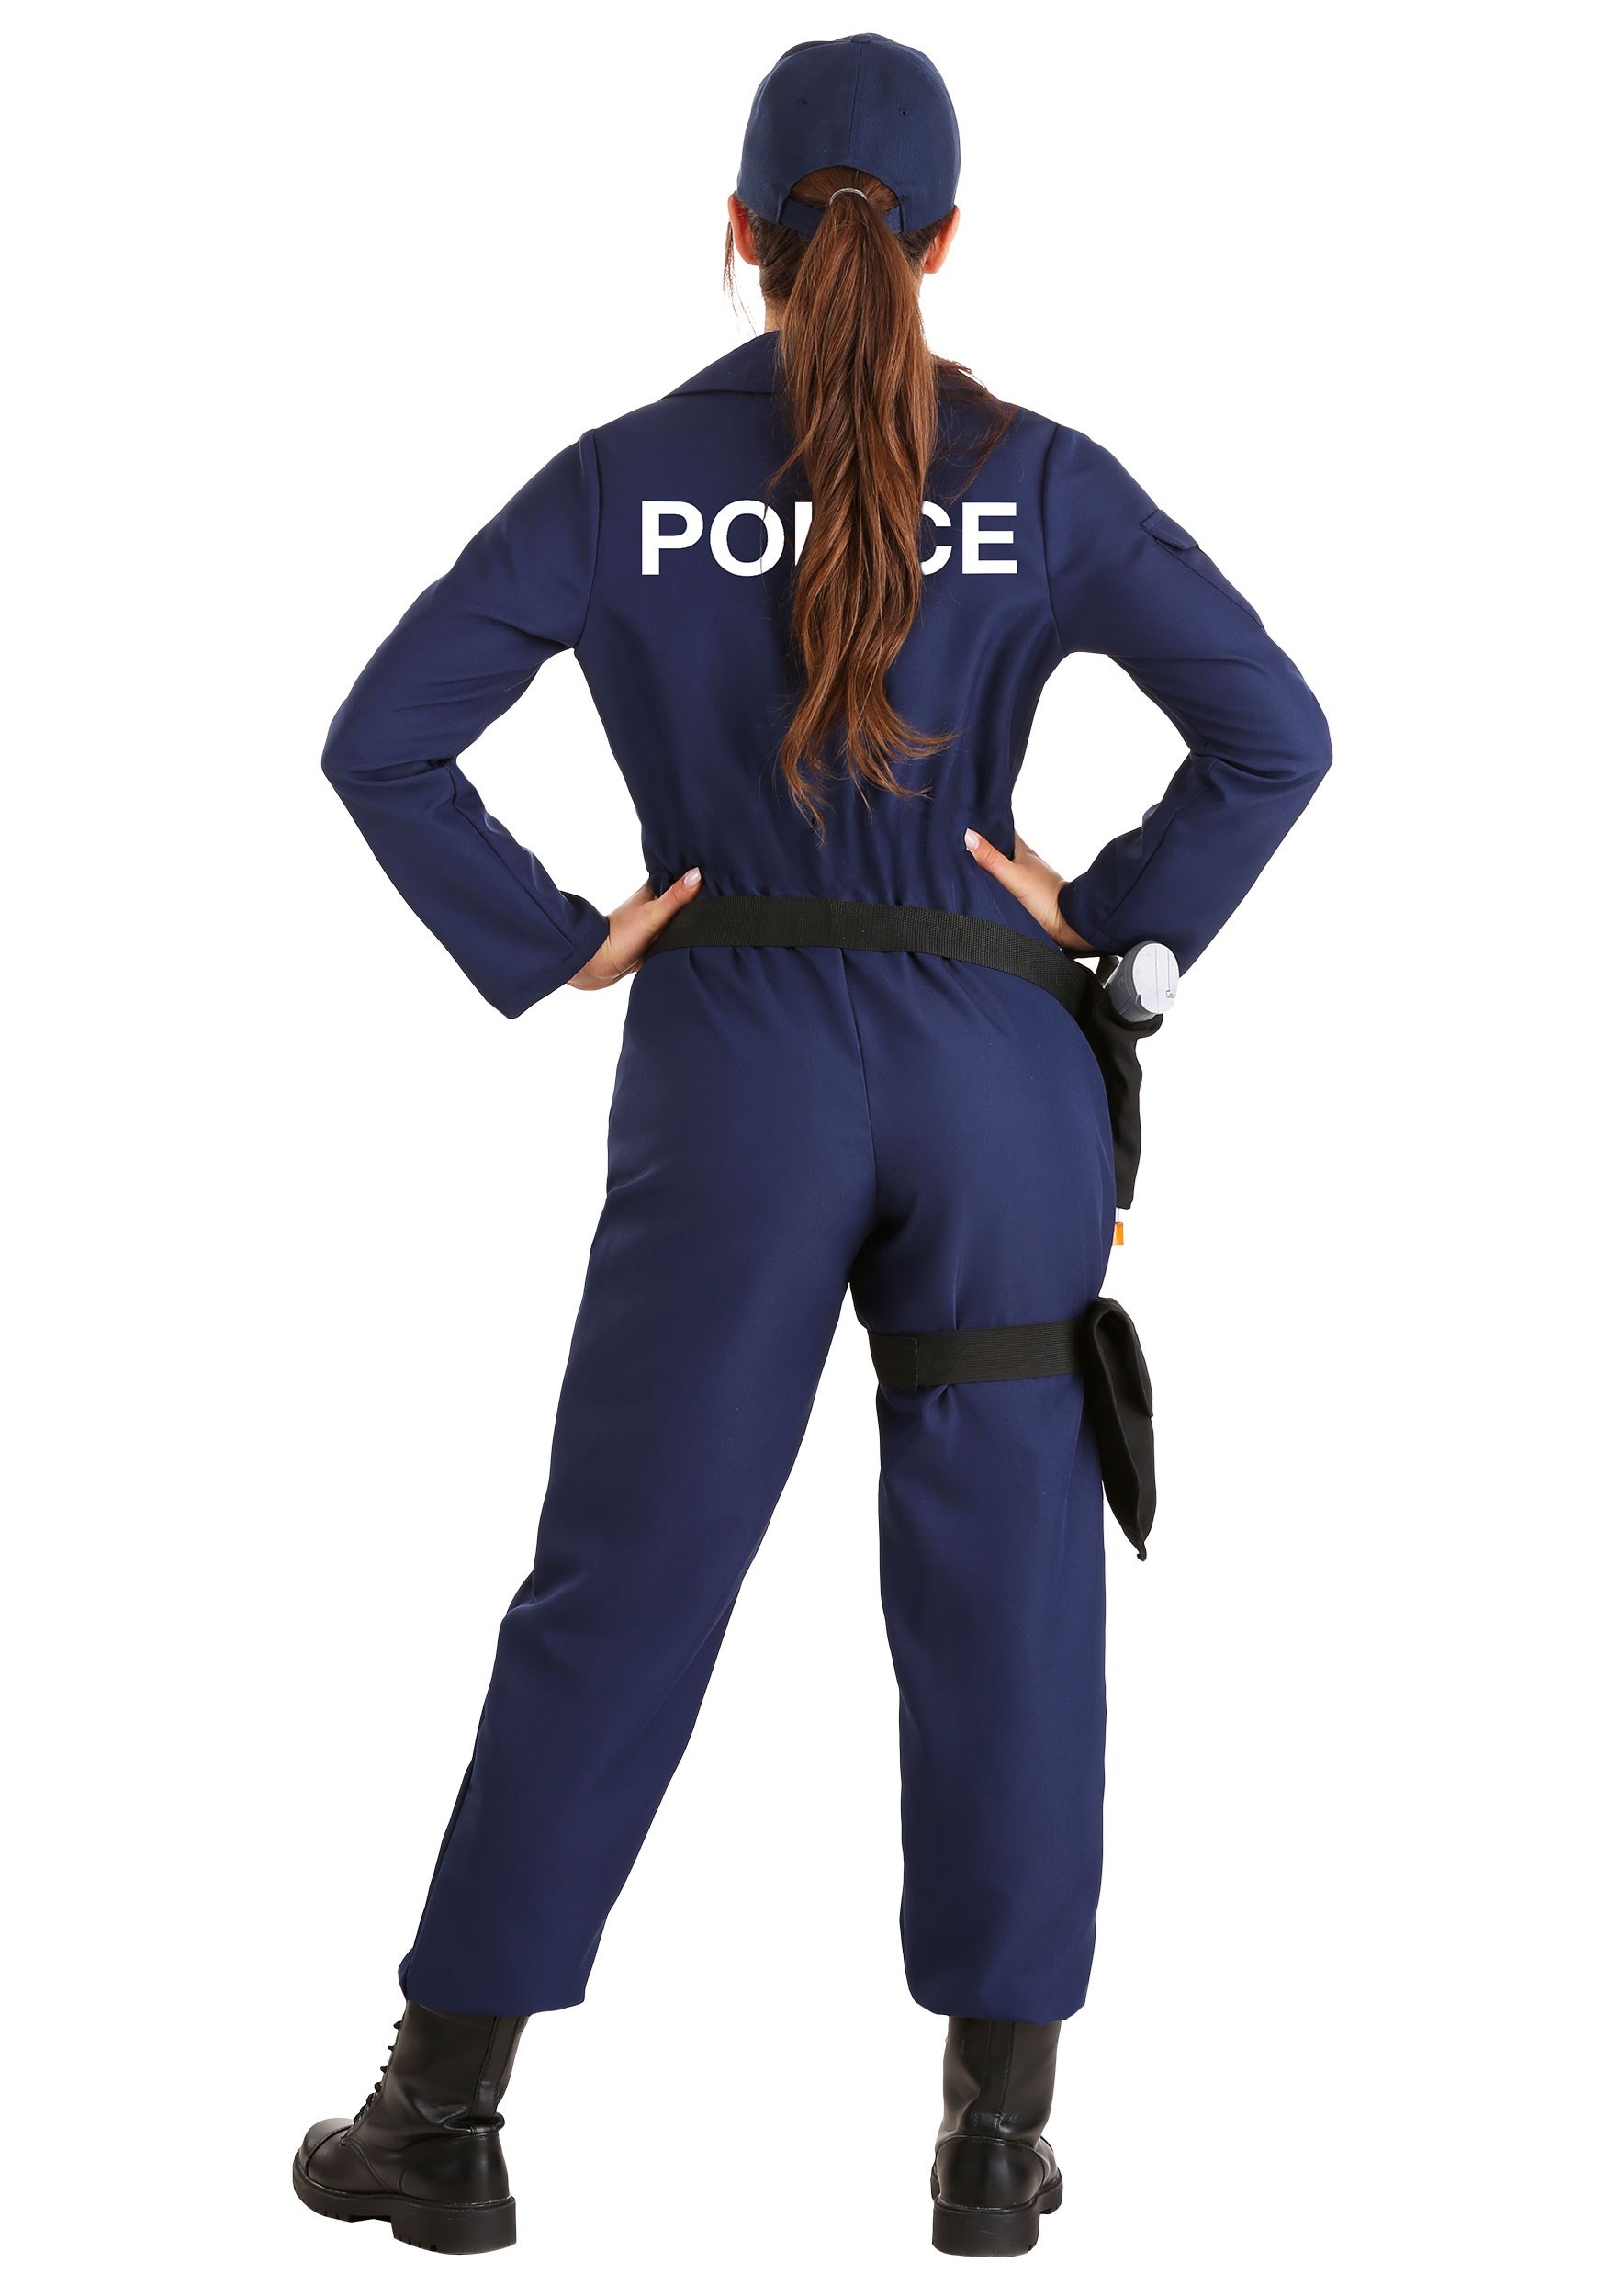  Plus Size Workout Clothes for Women Sexy Female Cop